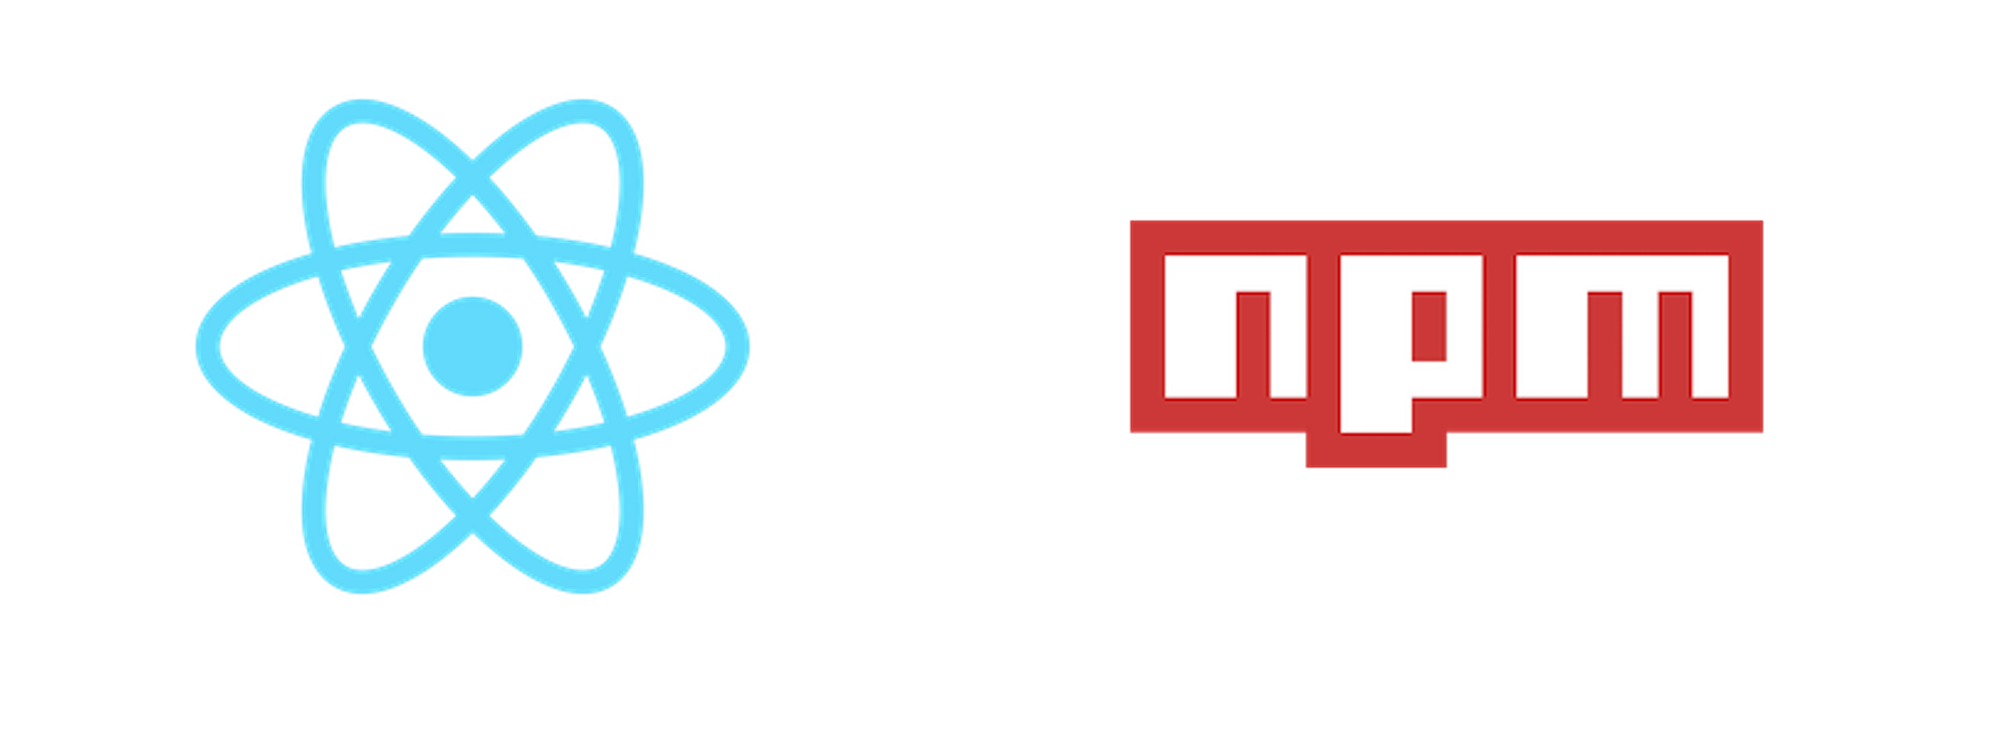 React & NPM living together in harmony.